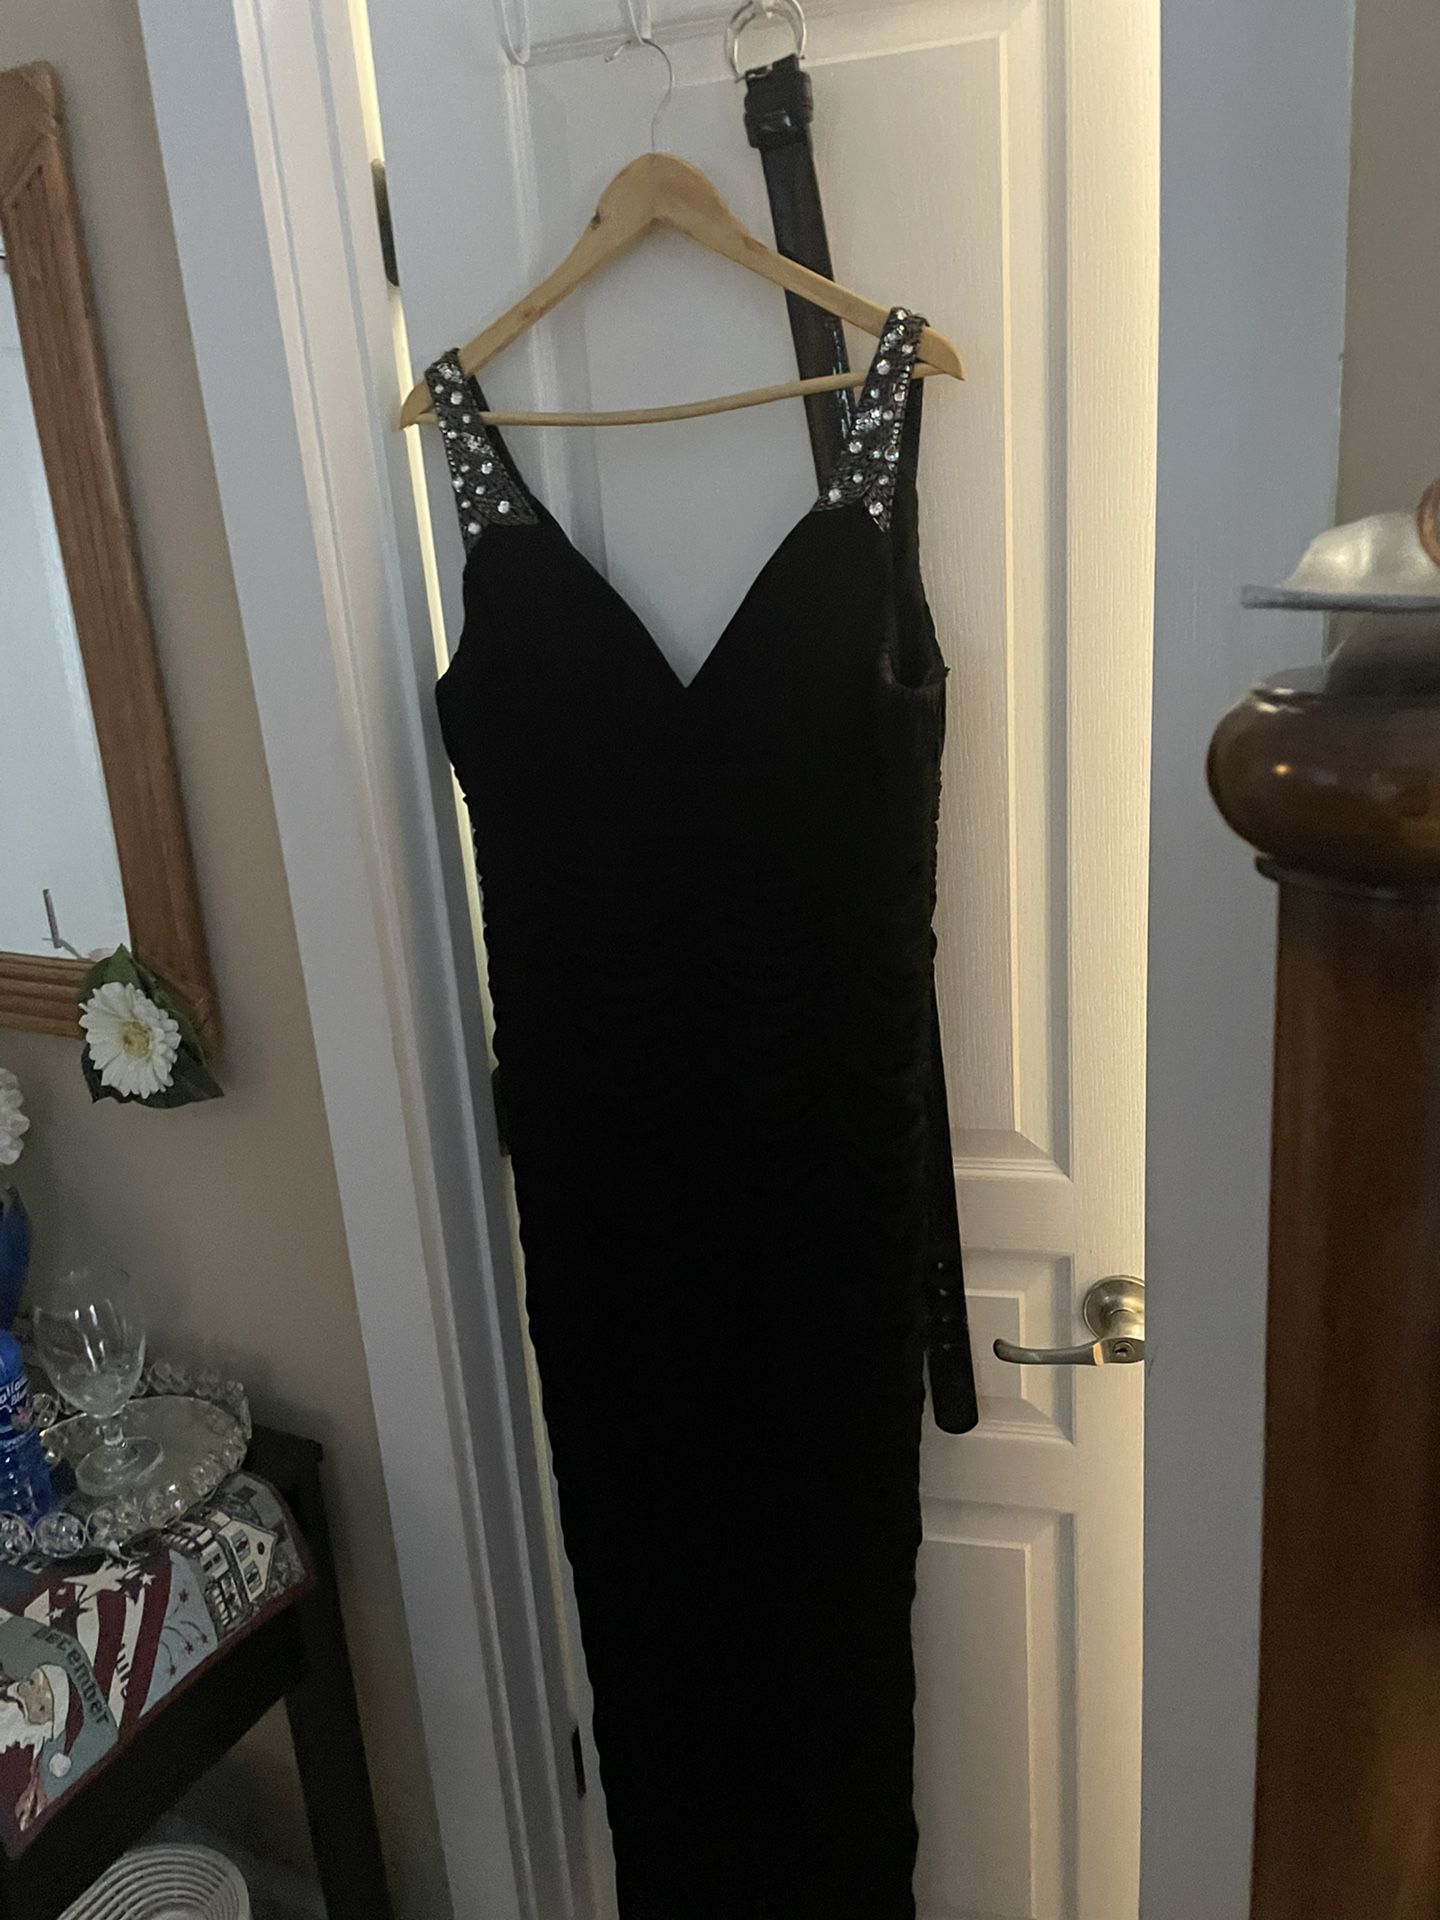 New Black Dress (Perfect For Wedding)